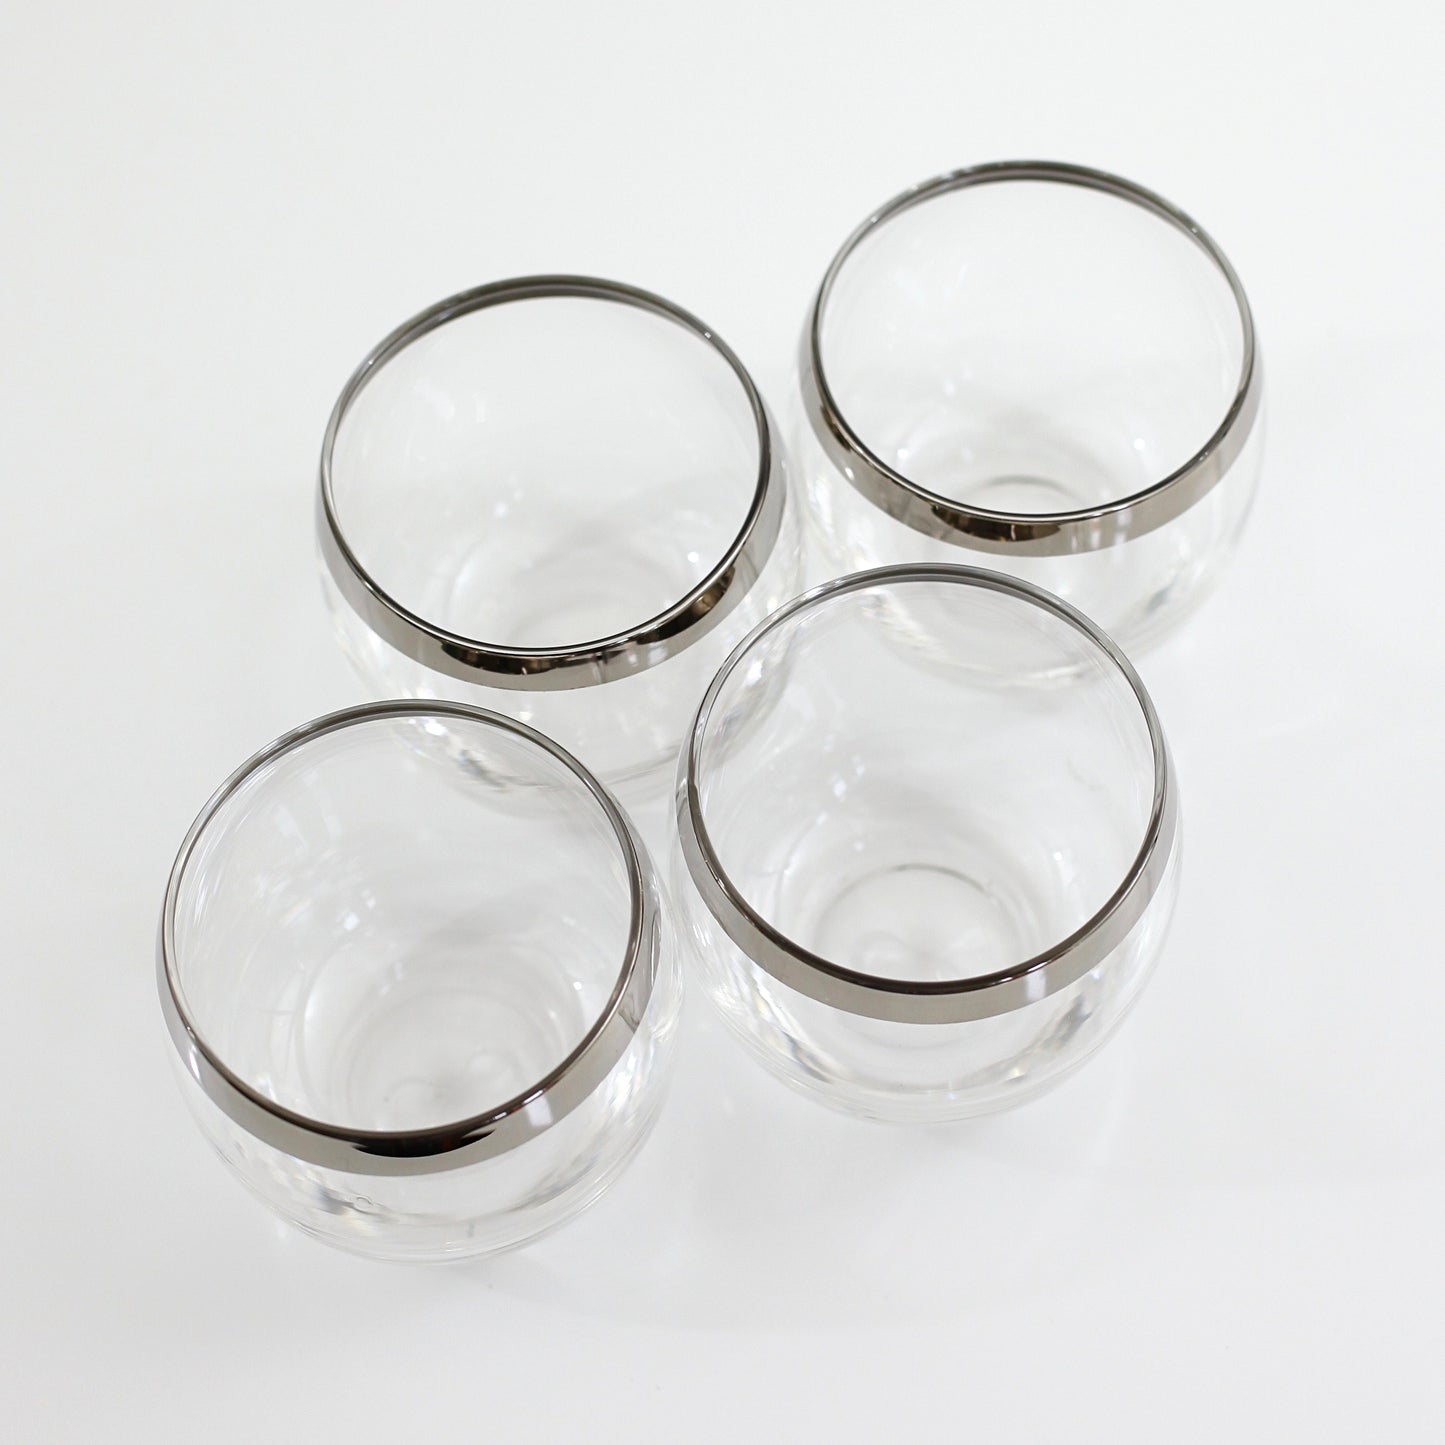 SOLD - Mid Century Modern Silver Rim Cocktail Glasses